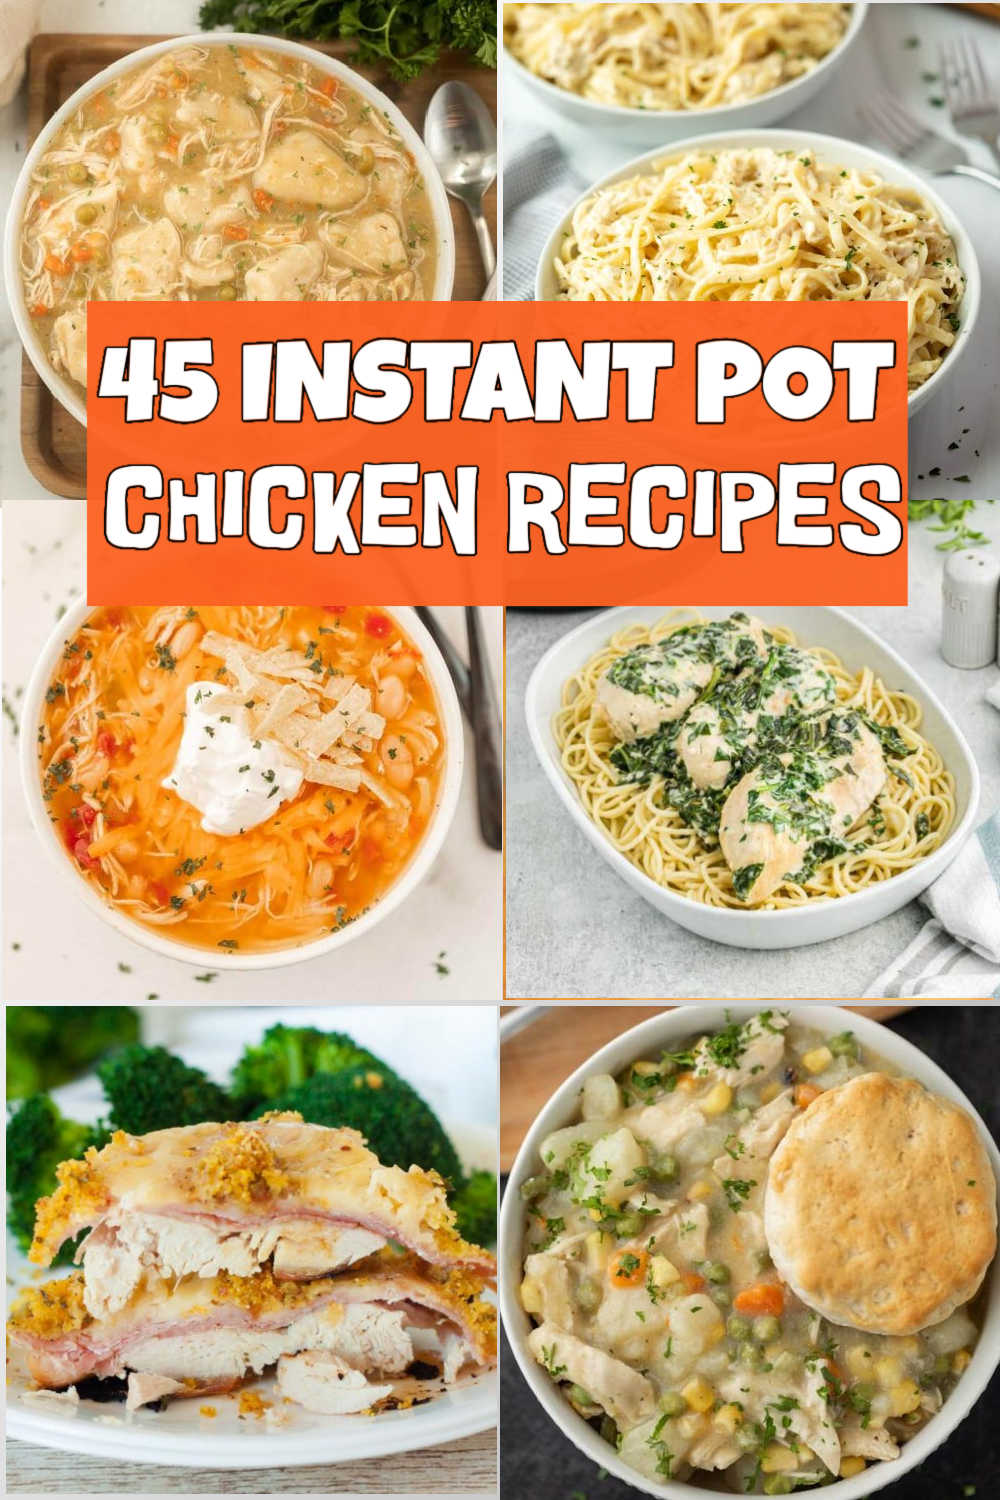 These 45 Instant Pot Chicken Recipes come together easily and you have a home cooked meal in minutes. Delicious and easy ingredients. Using the instant pot has been a game changer for my family. We love that we can throw in a prepared frozen meal and dinner is done within minutes. #eatingonadime #instantpotrecipes #instantpotchickenrecipes